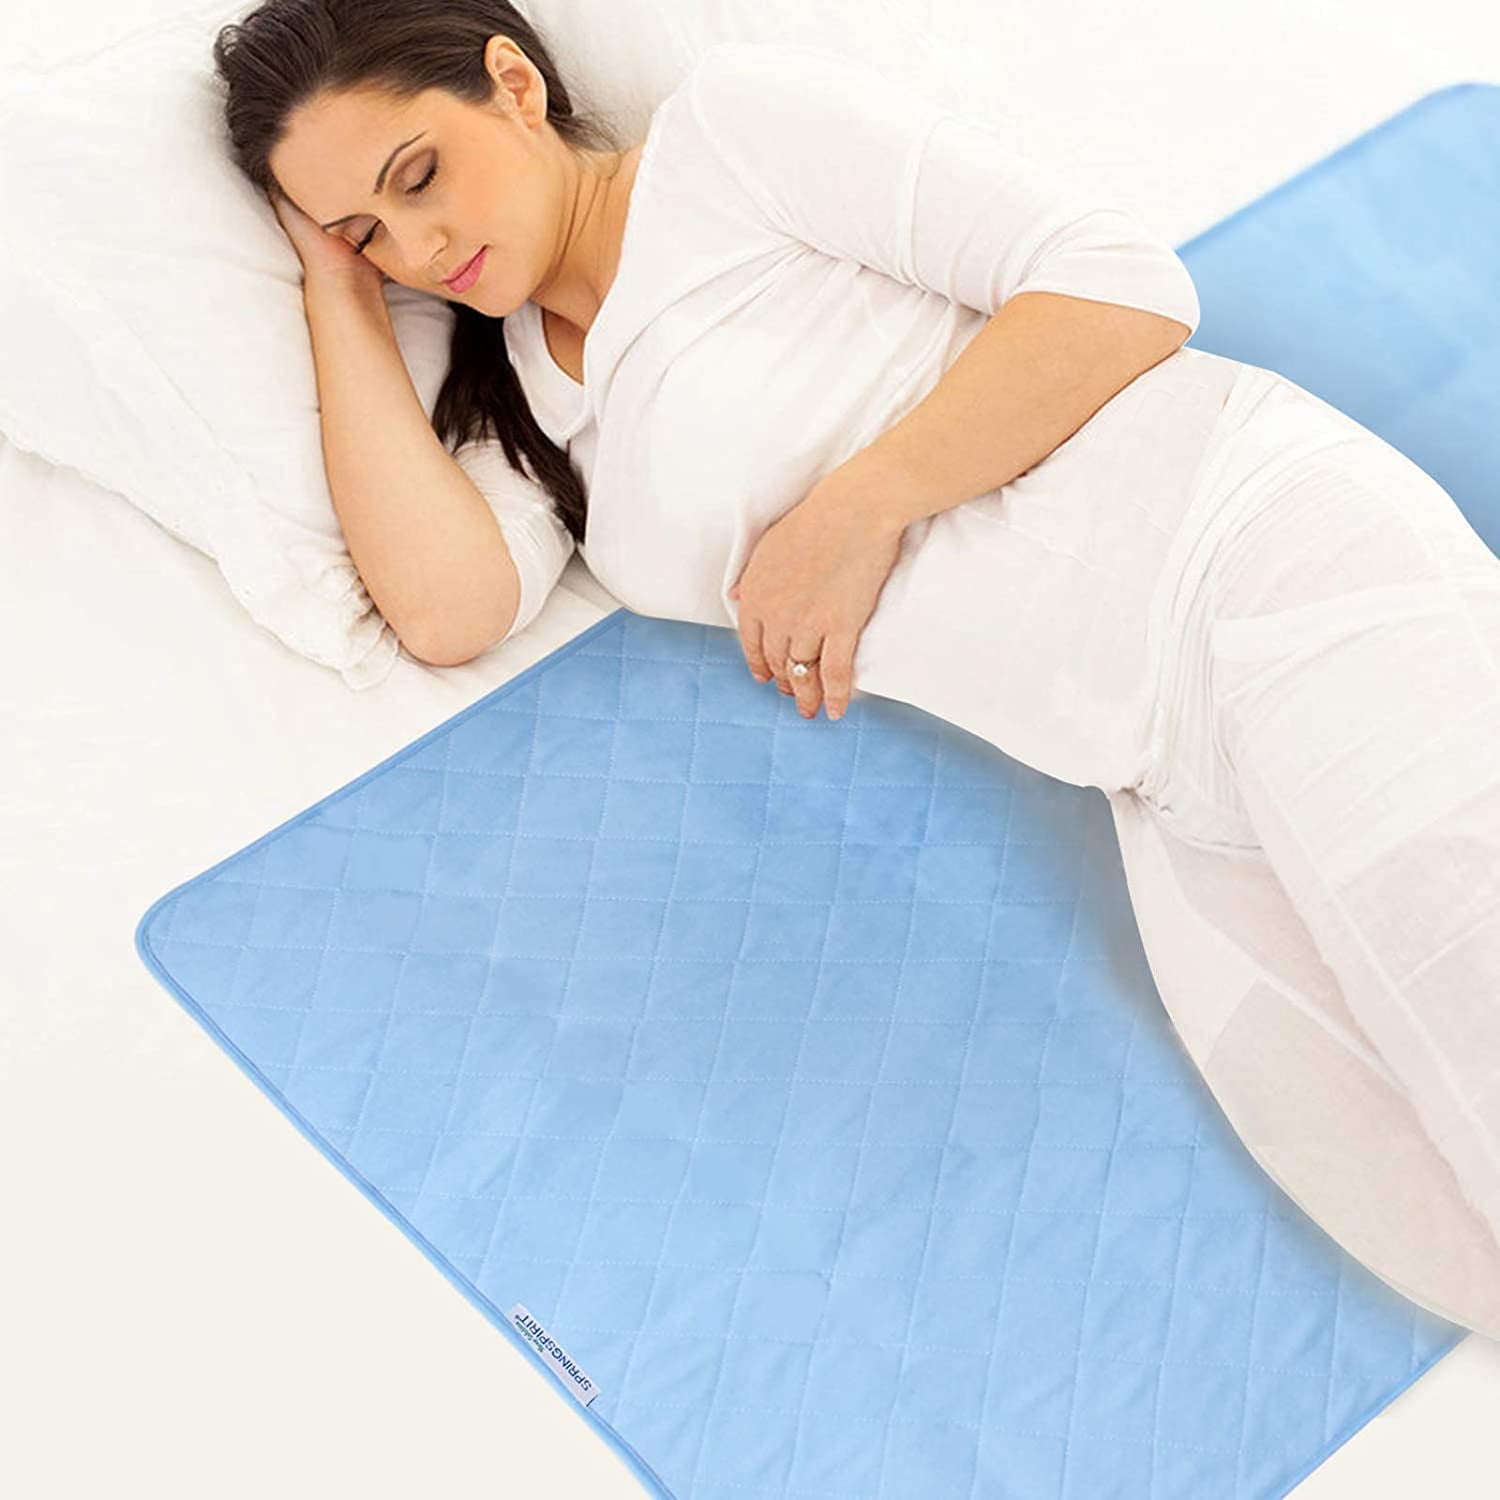 Palace Like Napier Springspirit Incontinence Washable Bed Pads, Reusable Waterproof Bed  Underpads with Non-Slip Back for Elderly, Kids, Women or Pets, 34" x 52",  Blue - Walmart.com